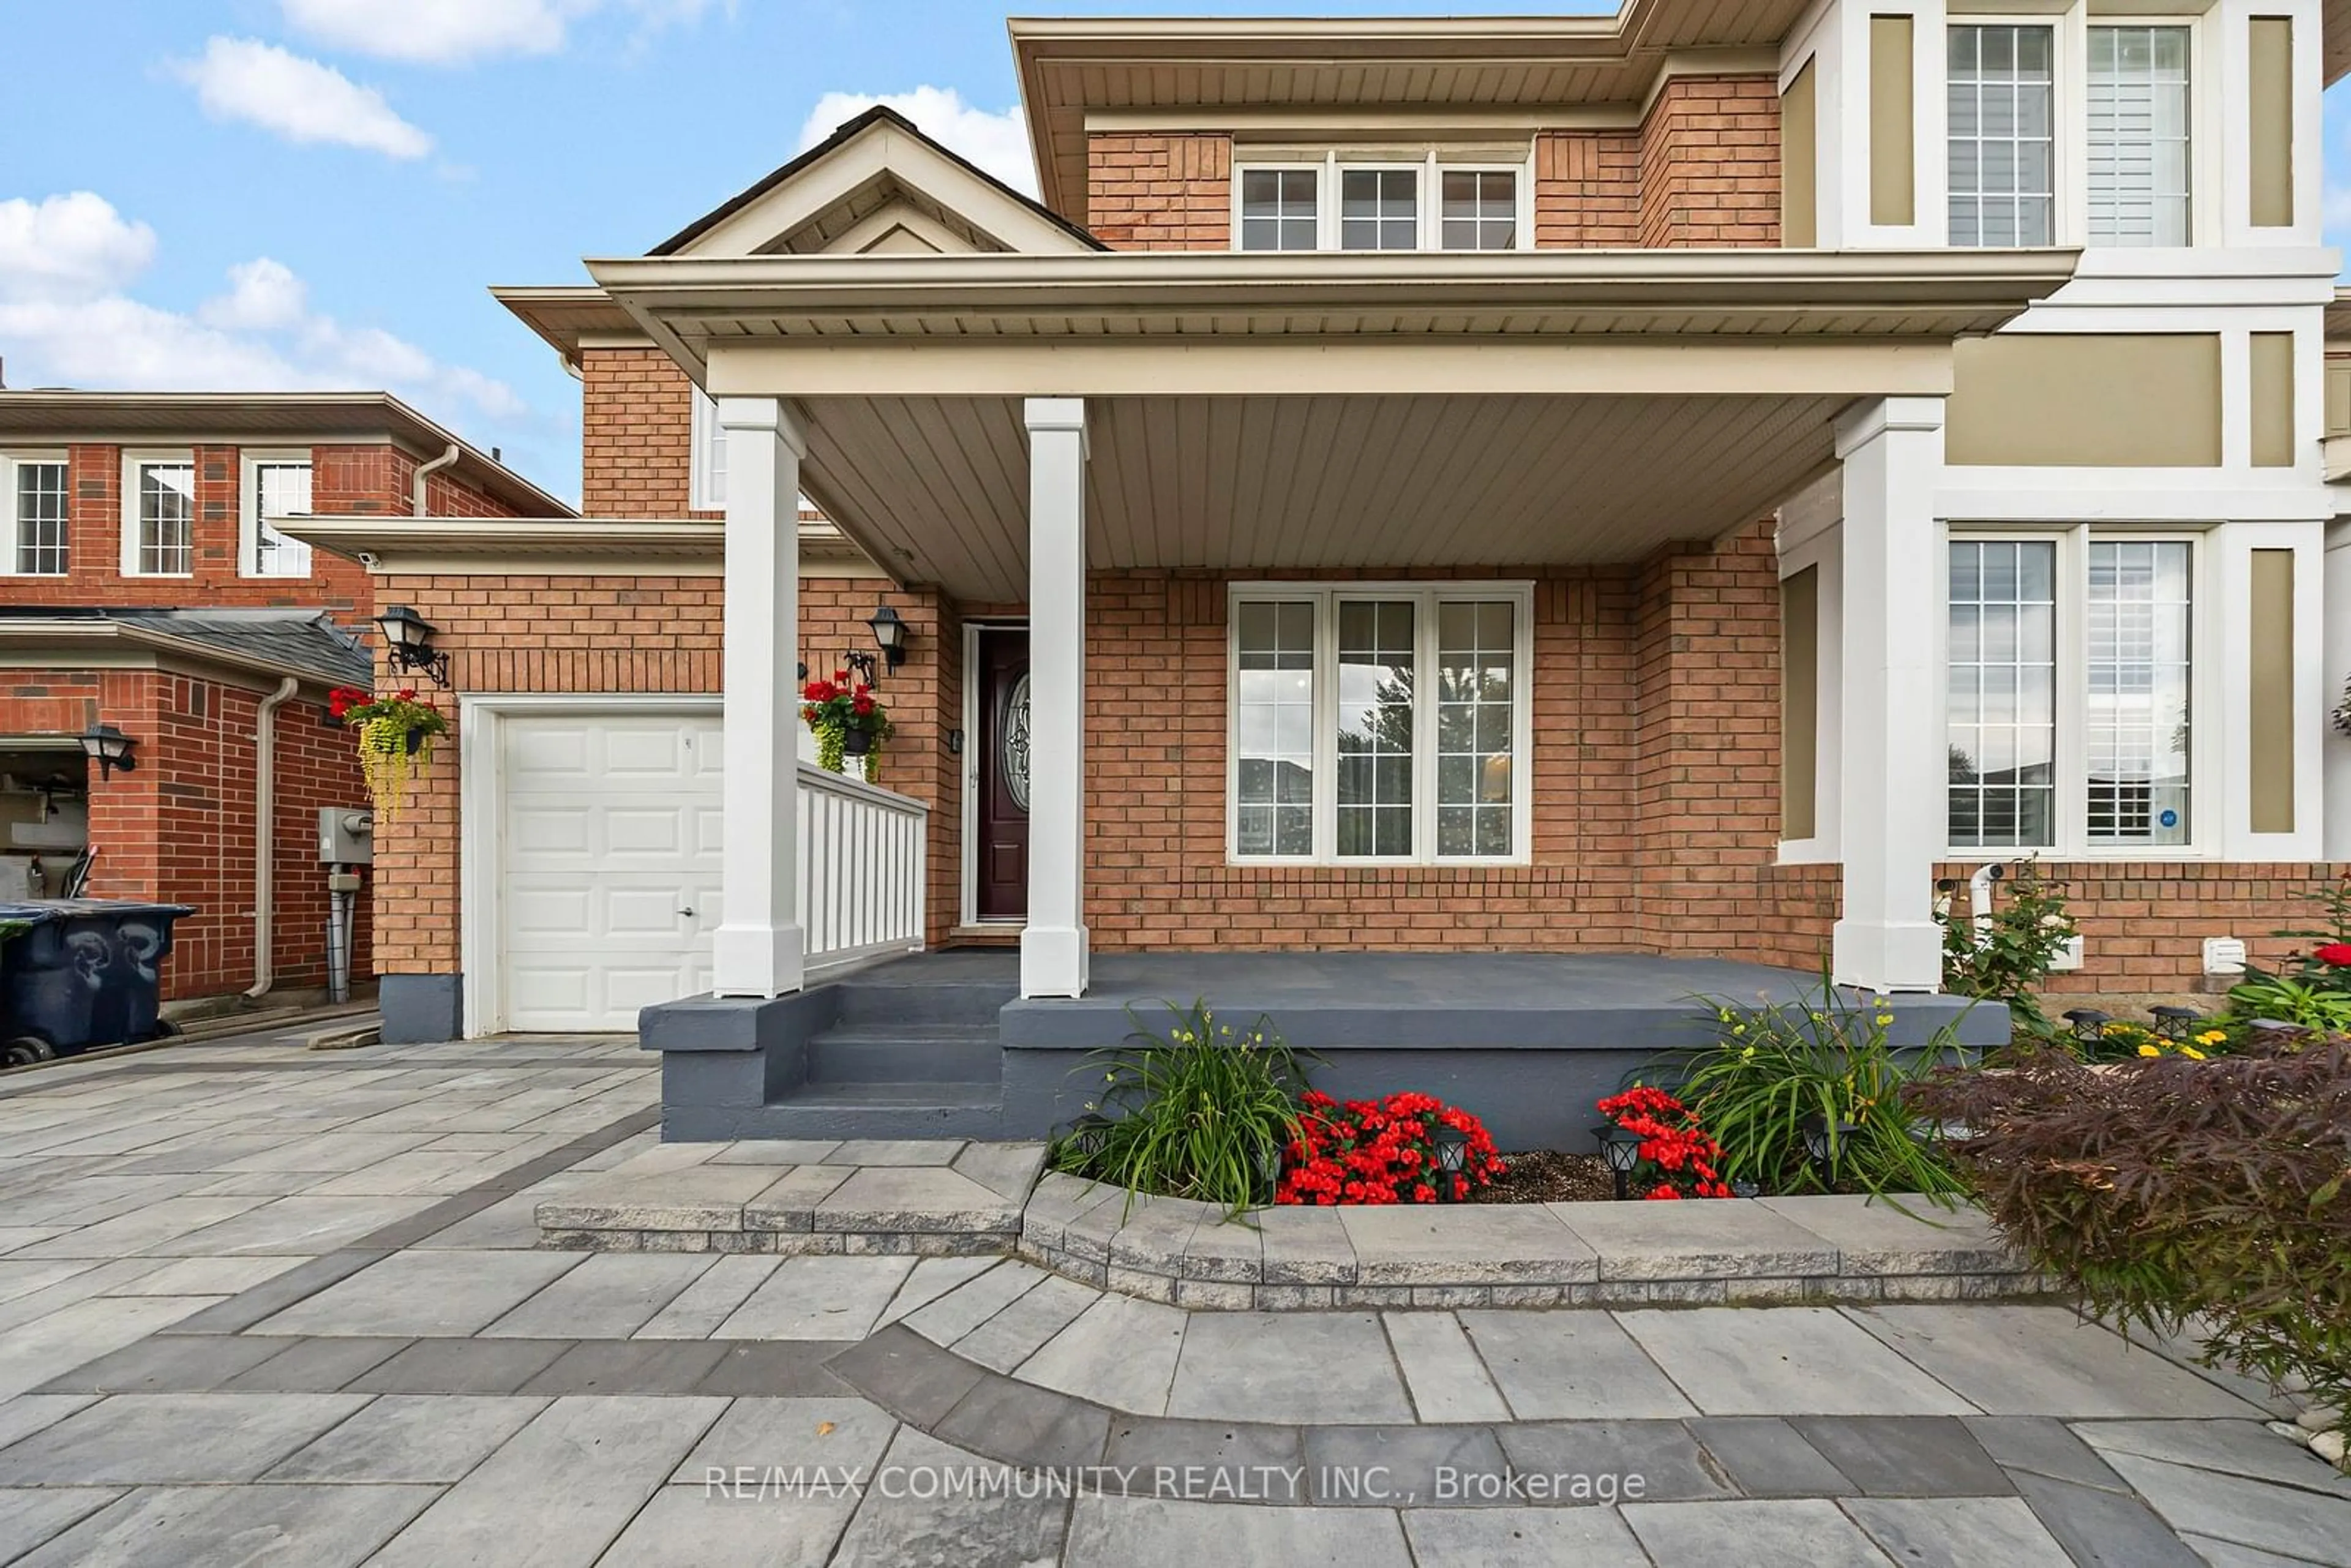 Home with brick exterior material for 24 Pitchpine Dr, Toronto Ontario M1X 1W5